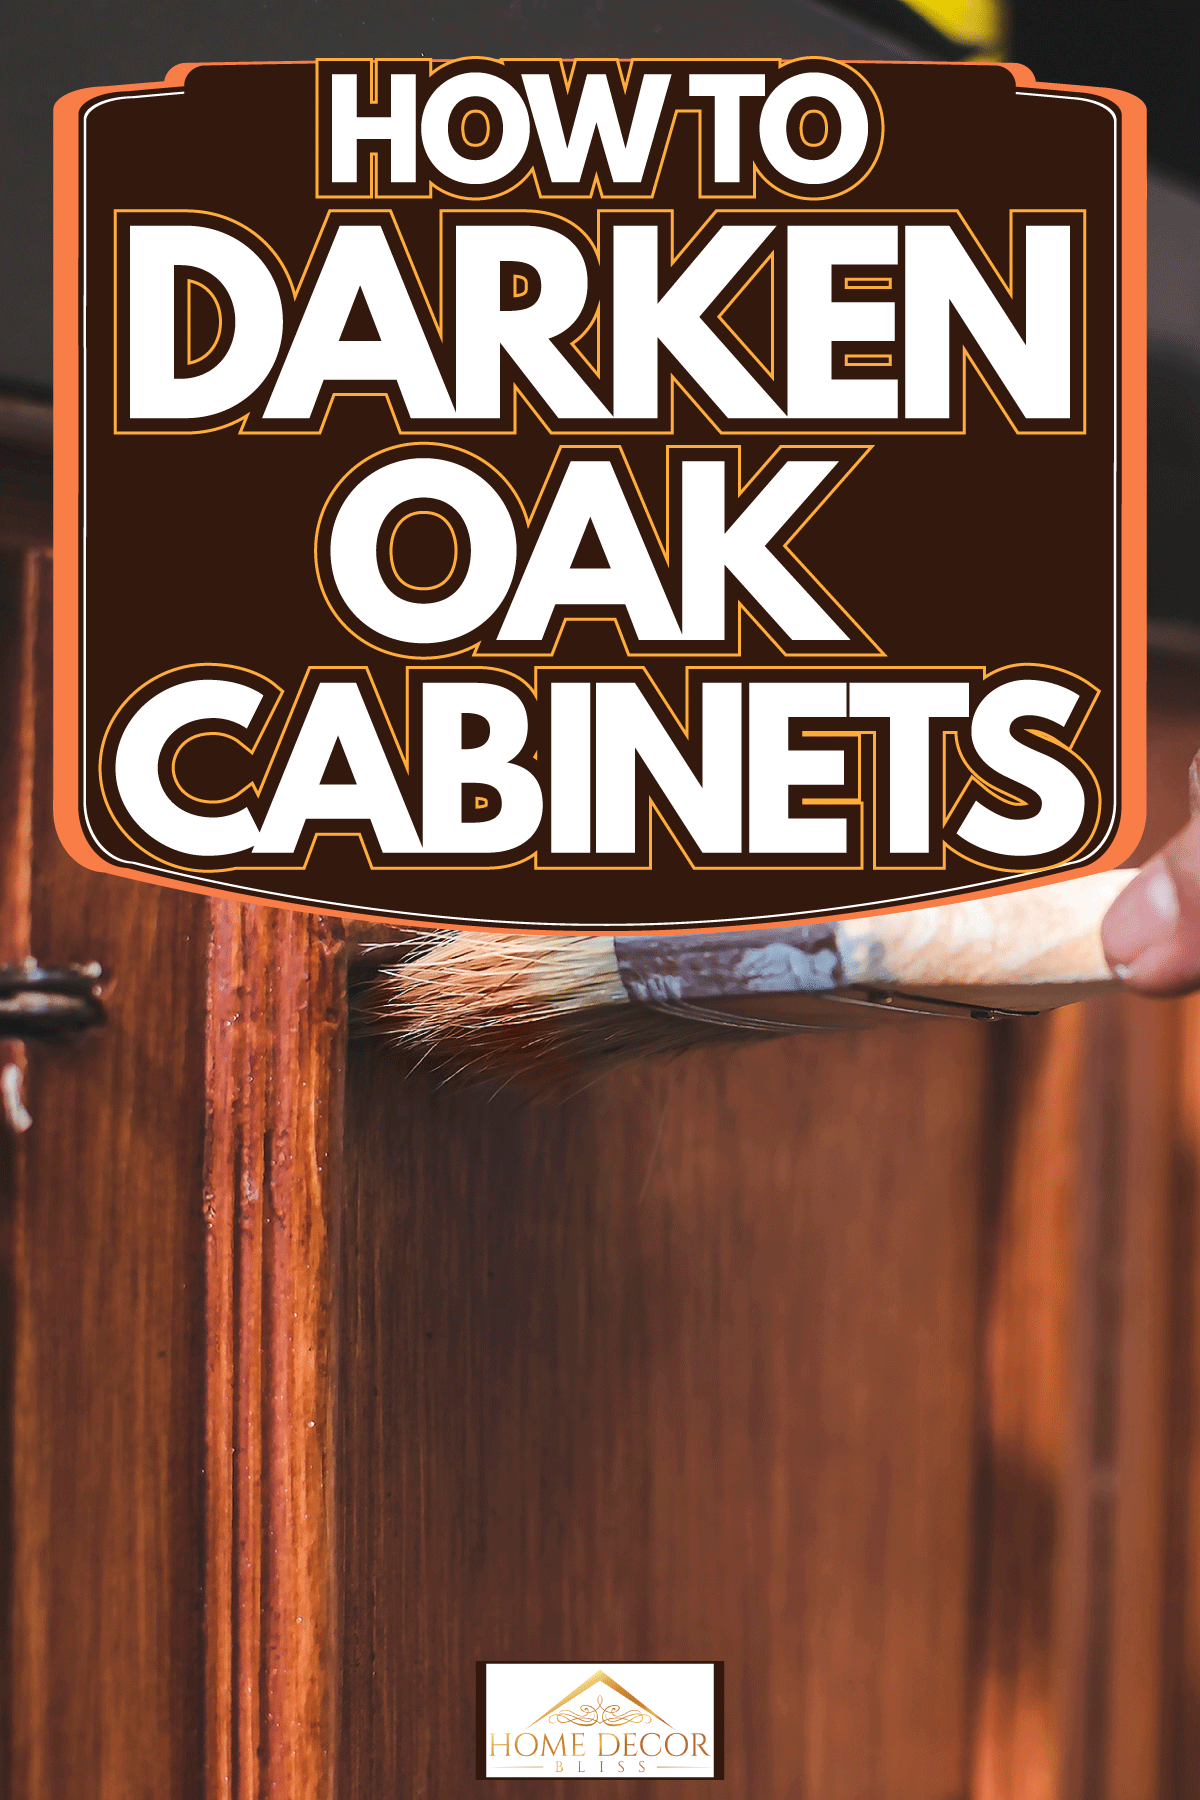 Coating an oak wood cabinet with varnish on surface, How To Darken Oak Cabinets